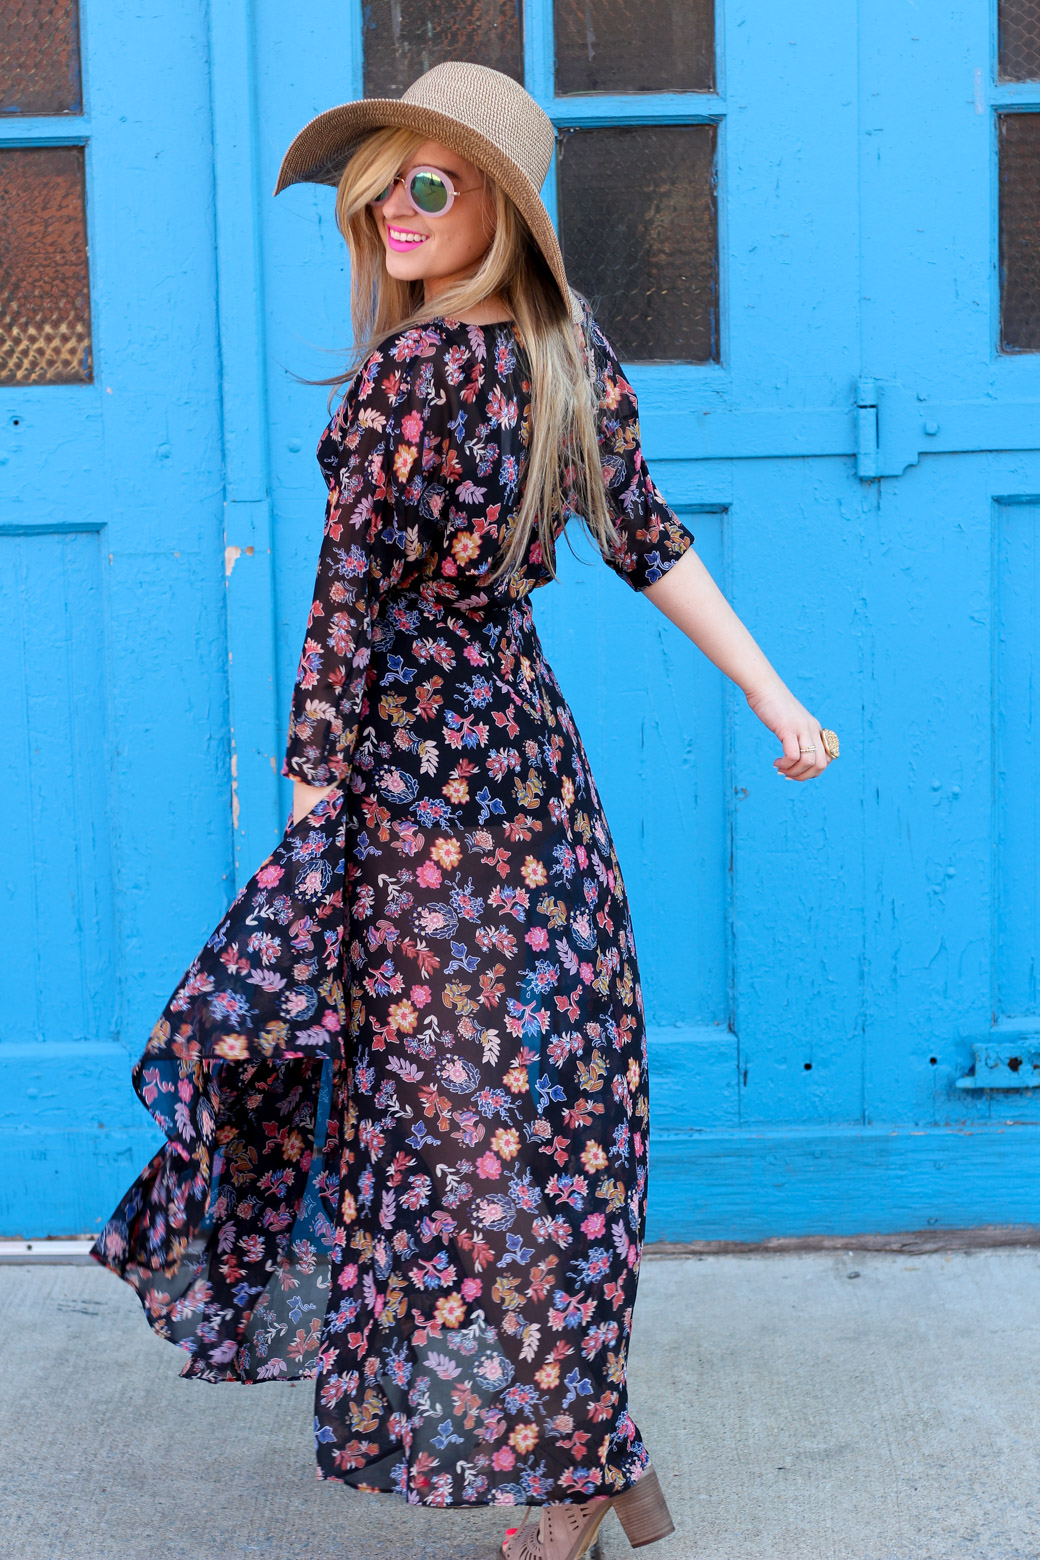 anthropologie-maxi-dress-chicago-style-blogger-11